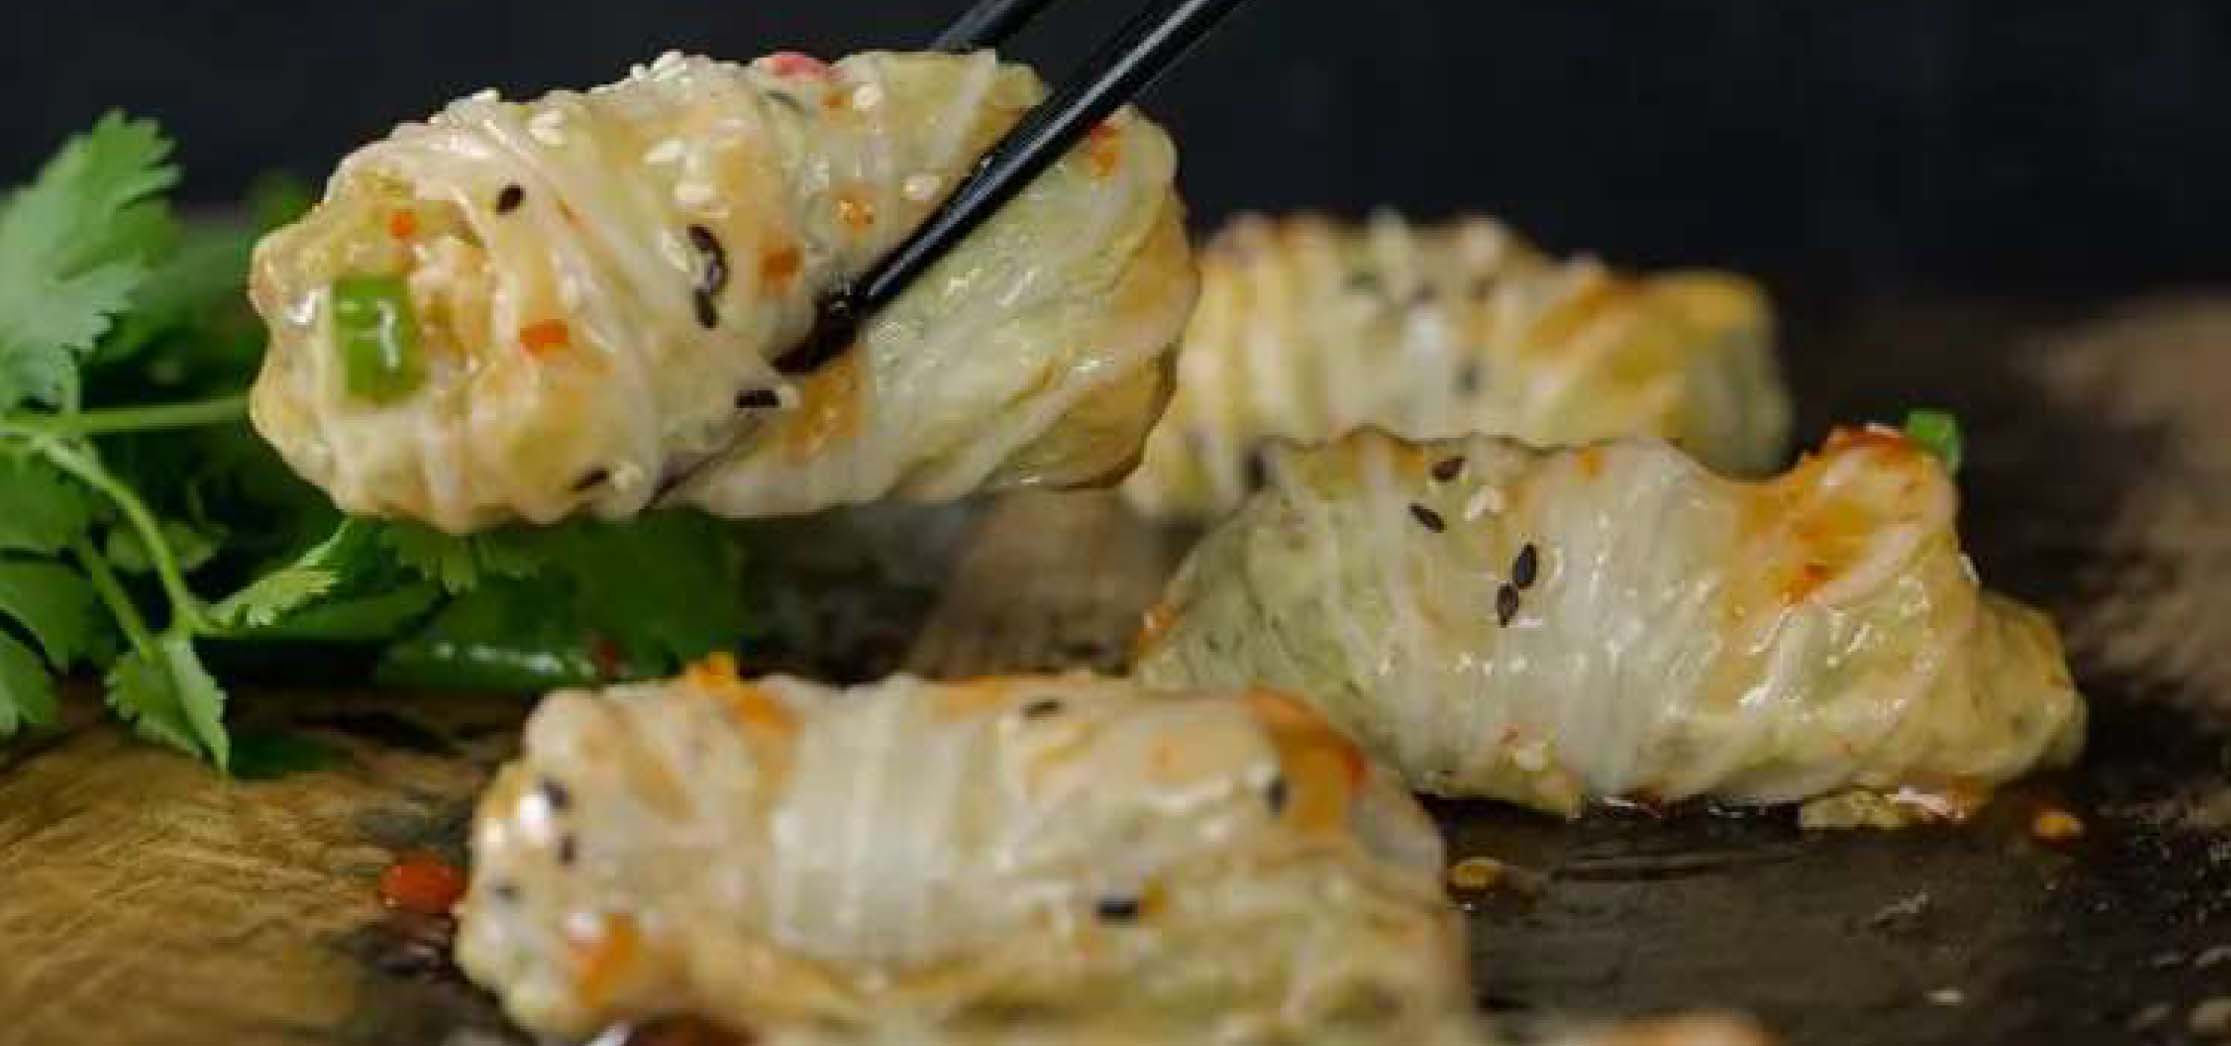 Chicken cabbage dumplings with sweet chili sauce drizzled on top.